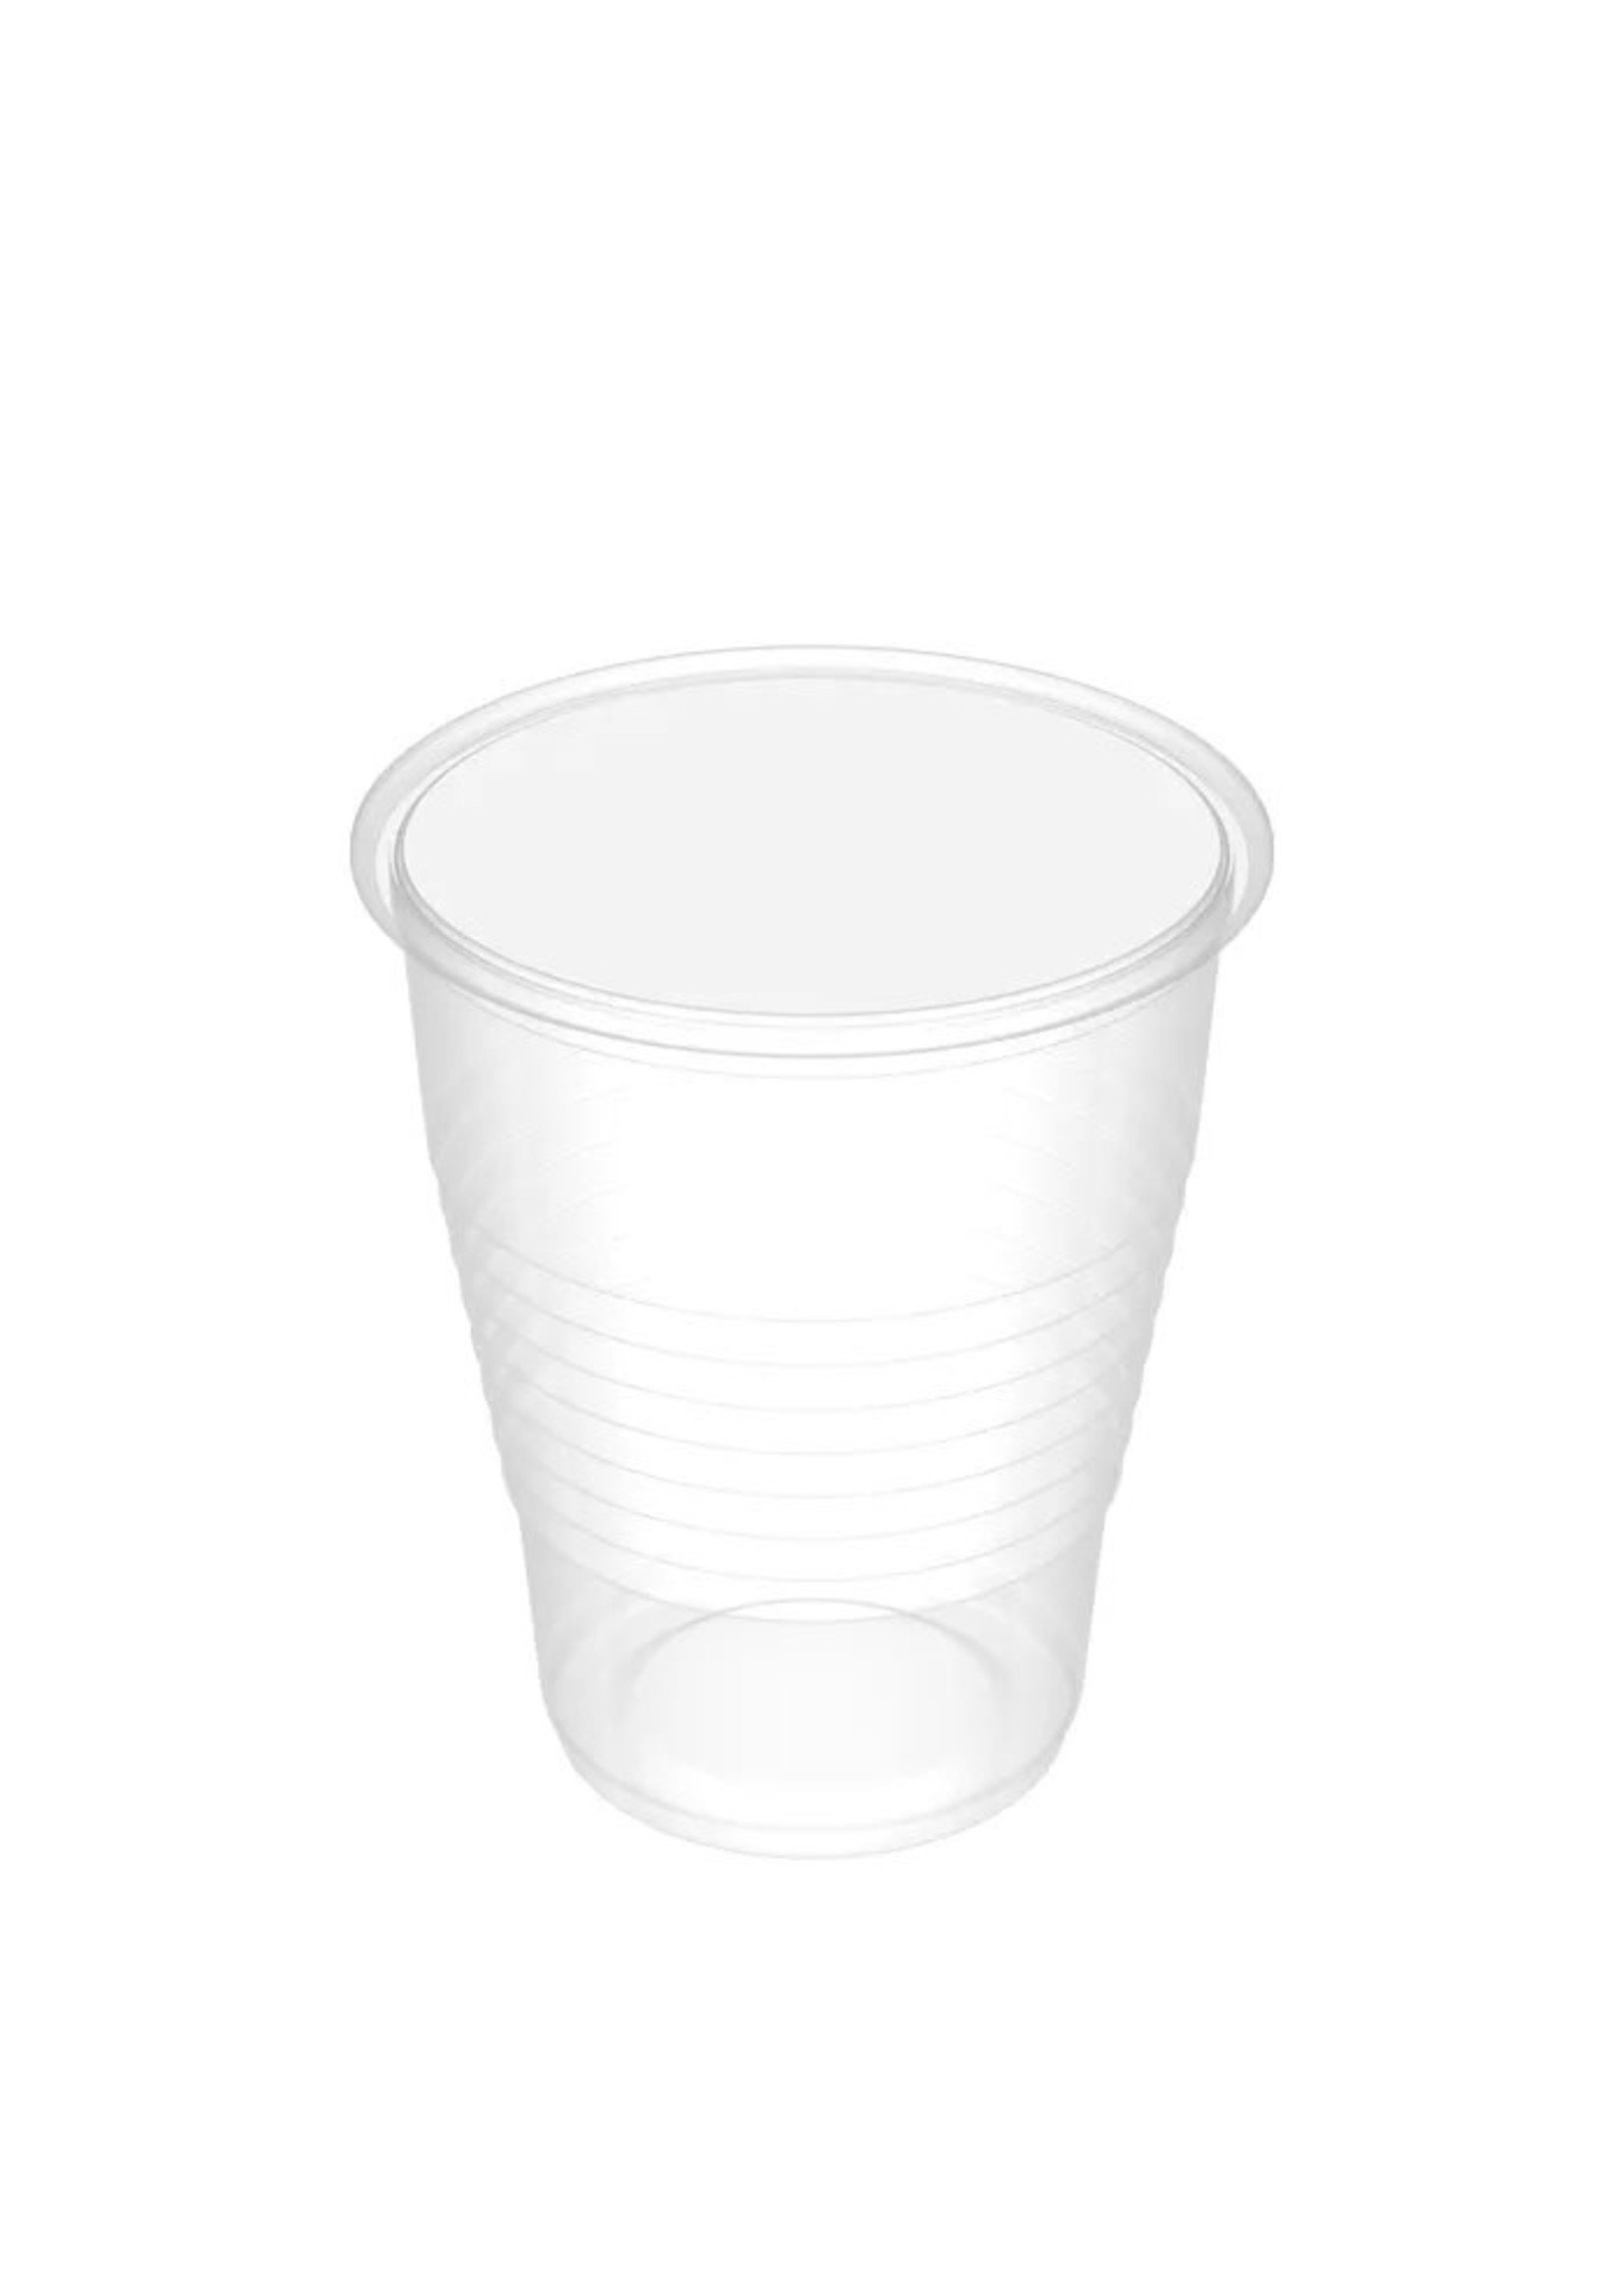 Dynarex Disposable 3oz cups box of 100